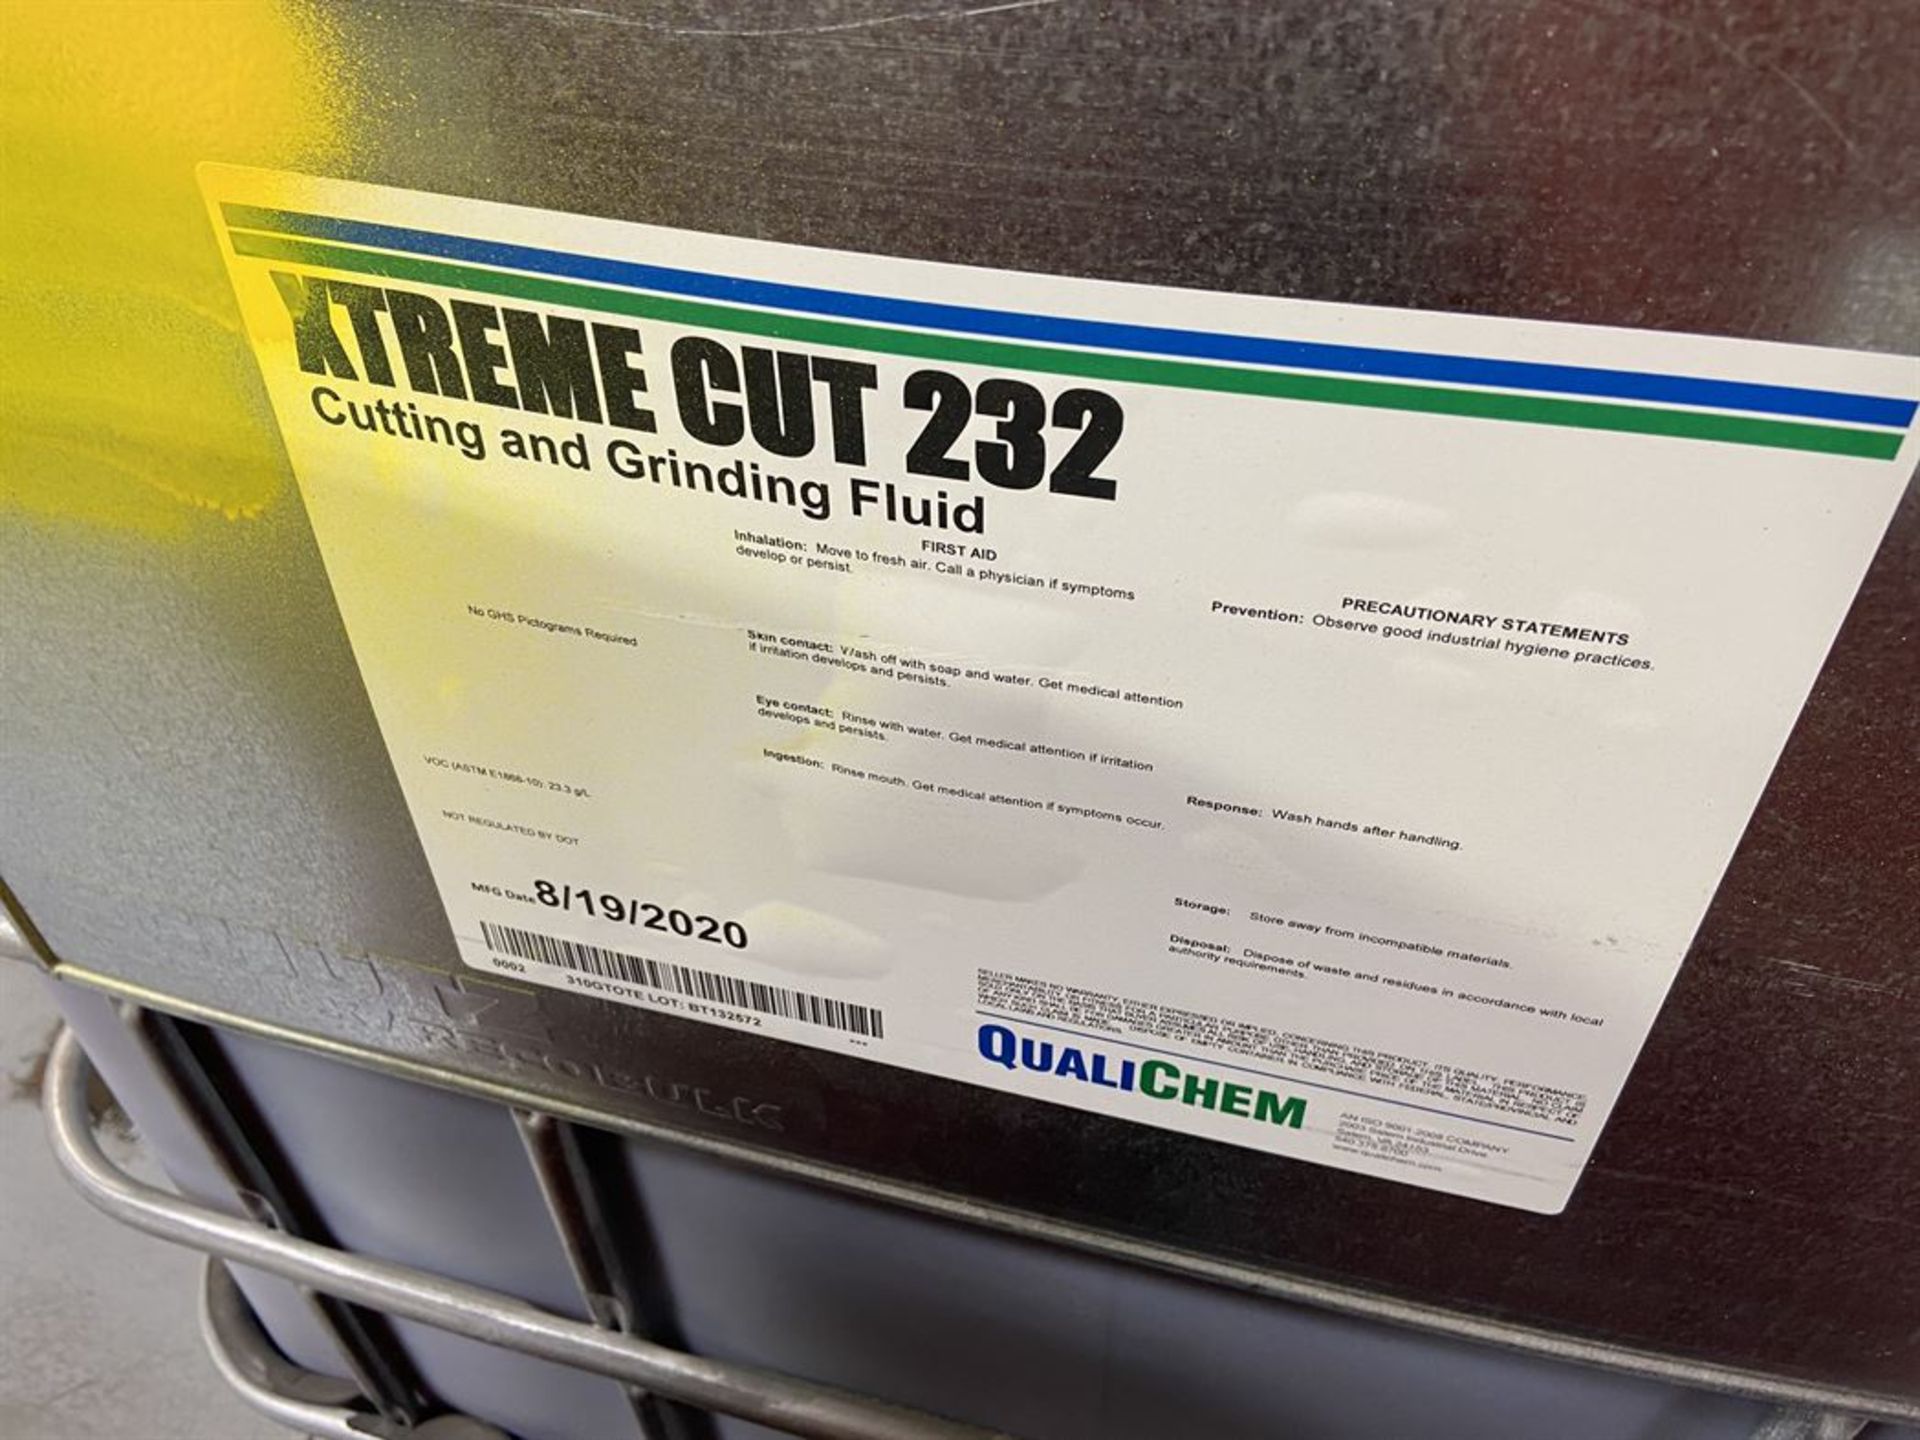 (1) Unopened Tote of Xtreme Cut 232 Grinding and Cutting Fluid - Image 2 of 2